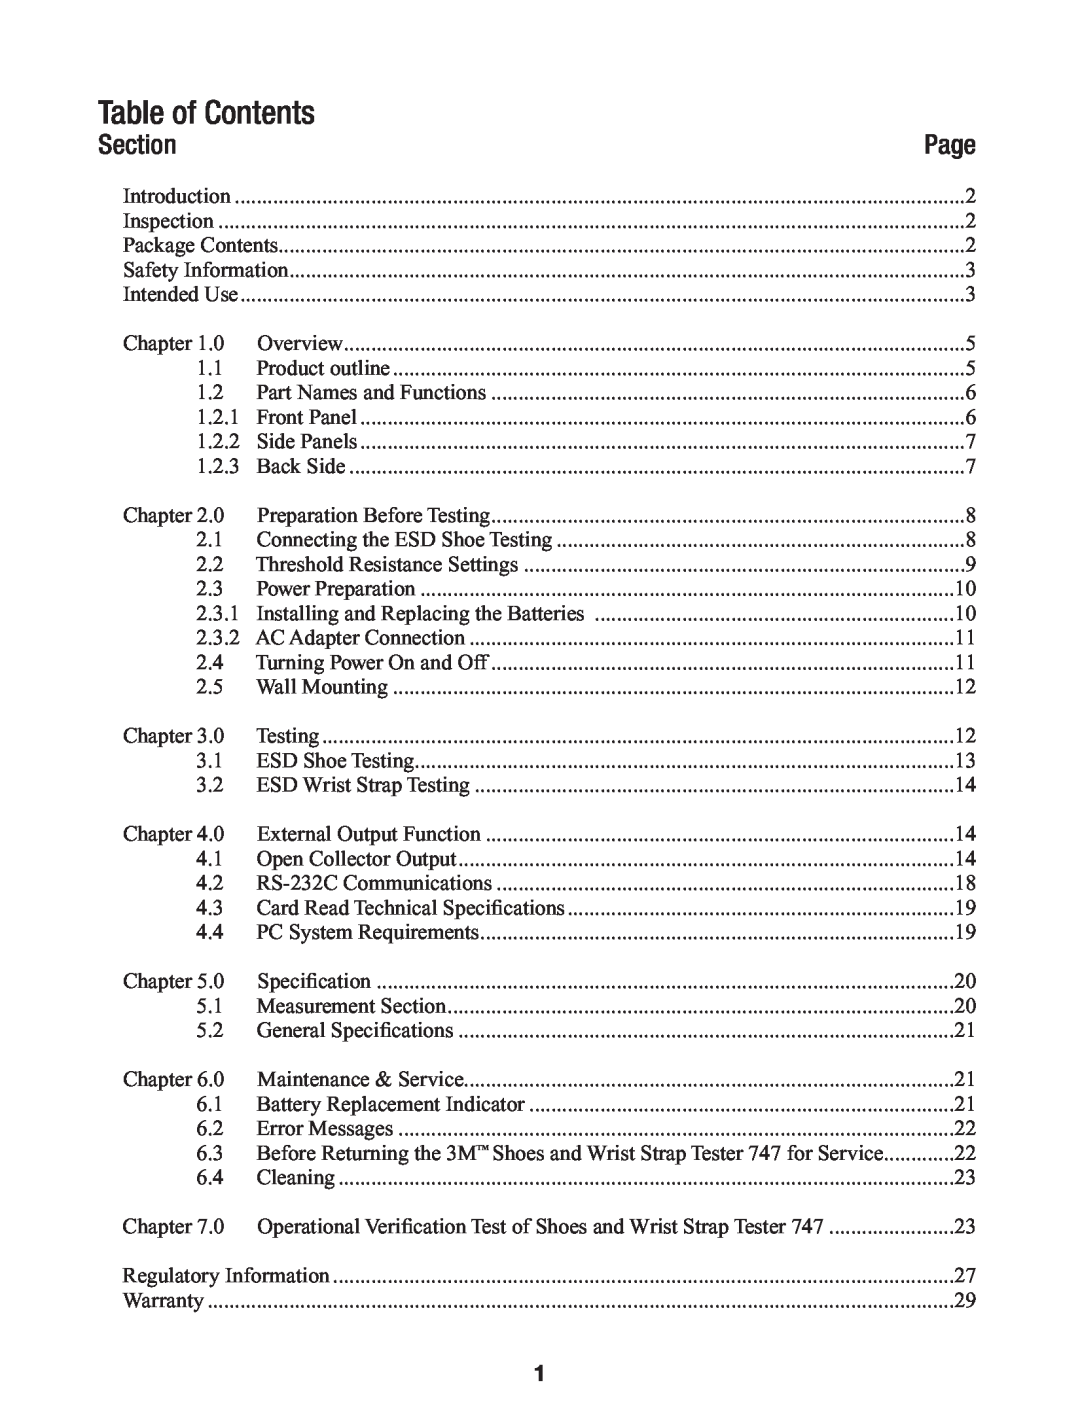 3M 747 manual Table of Contents, Section 